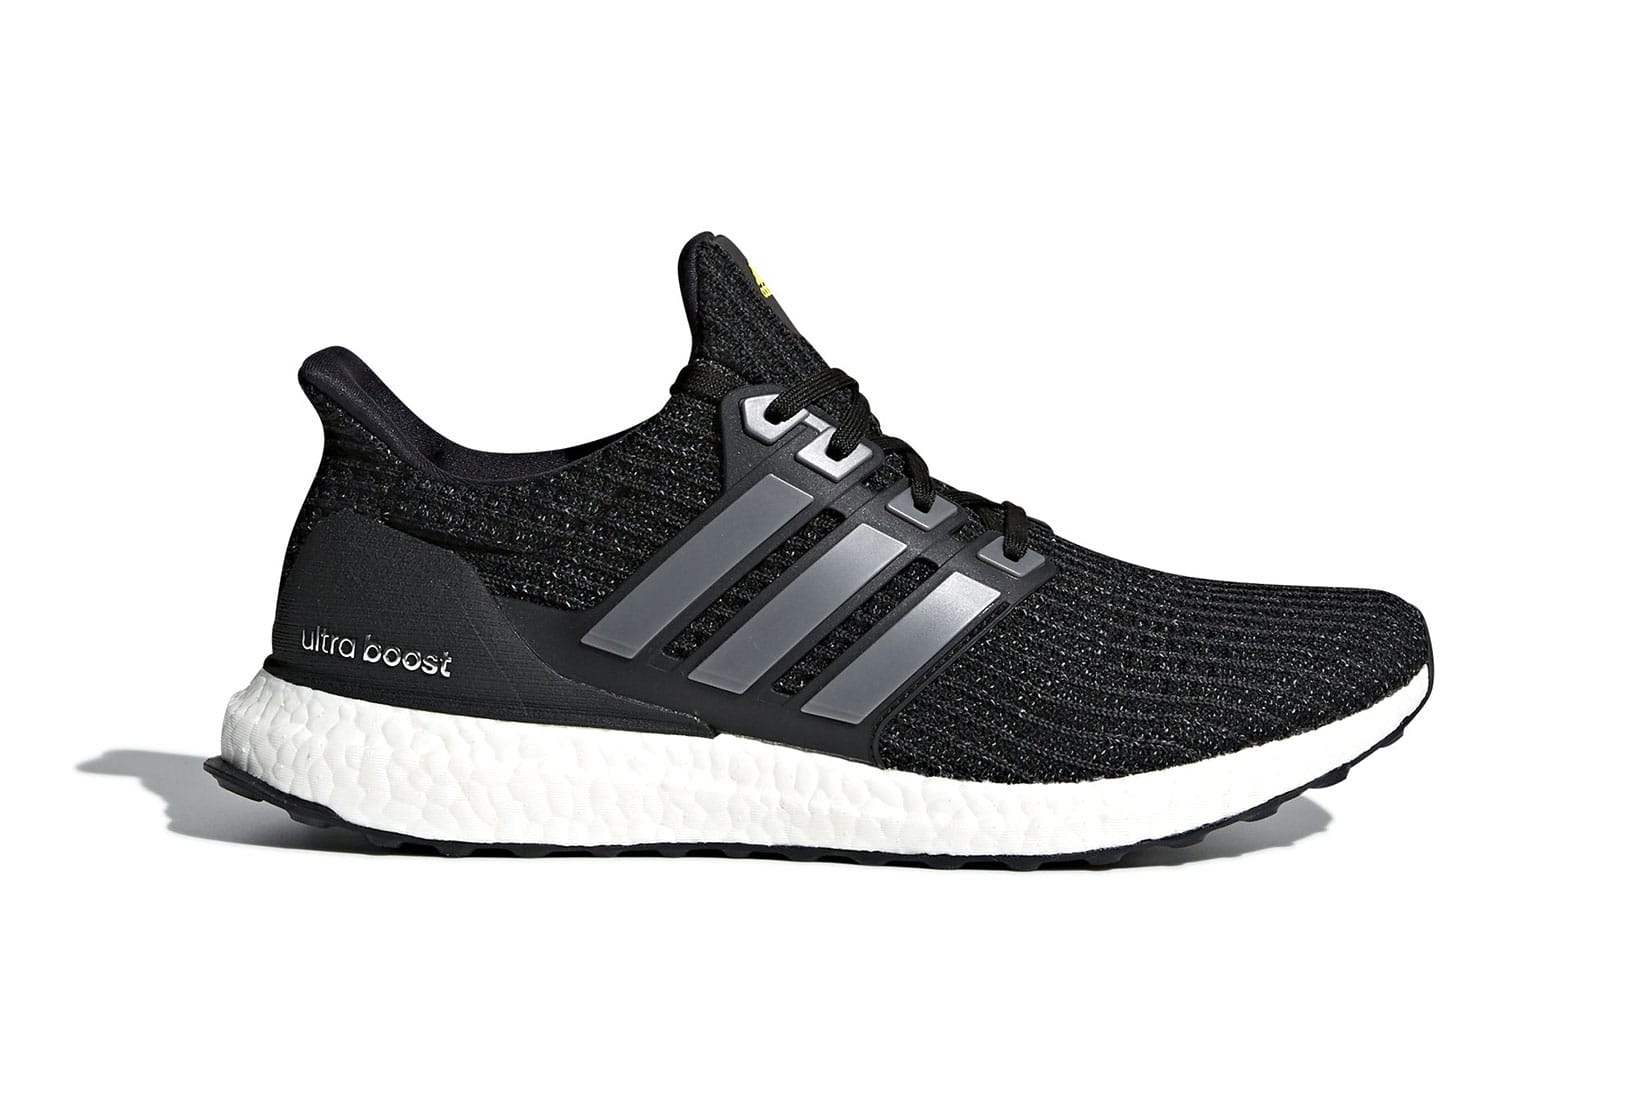 top 10 adidas running shoes